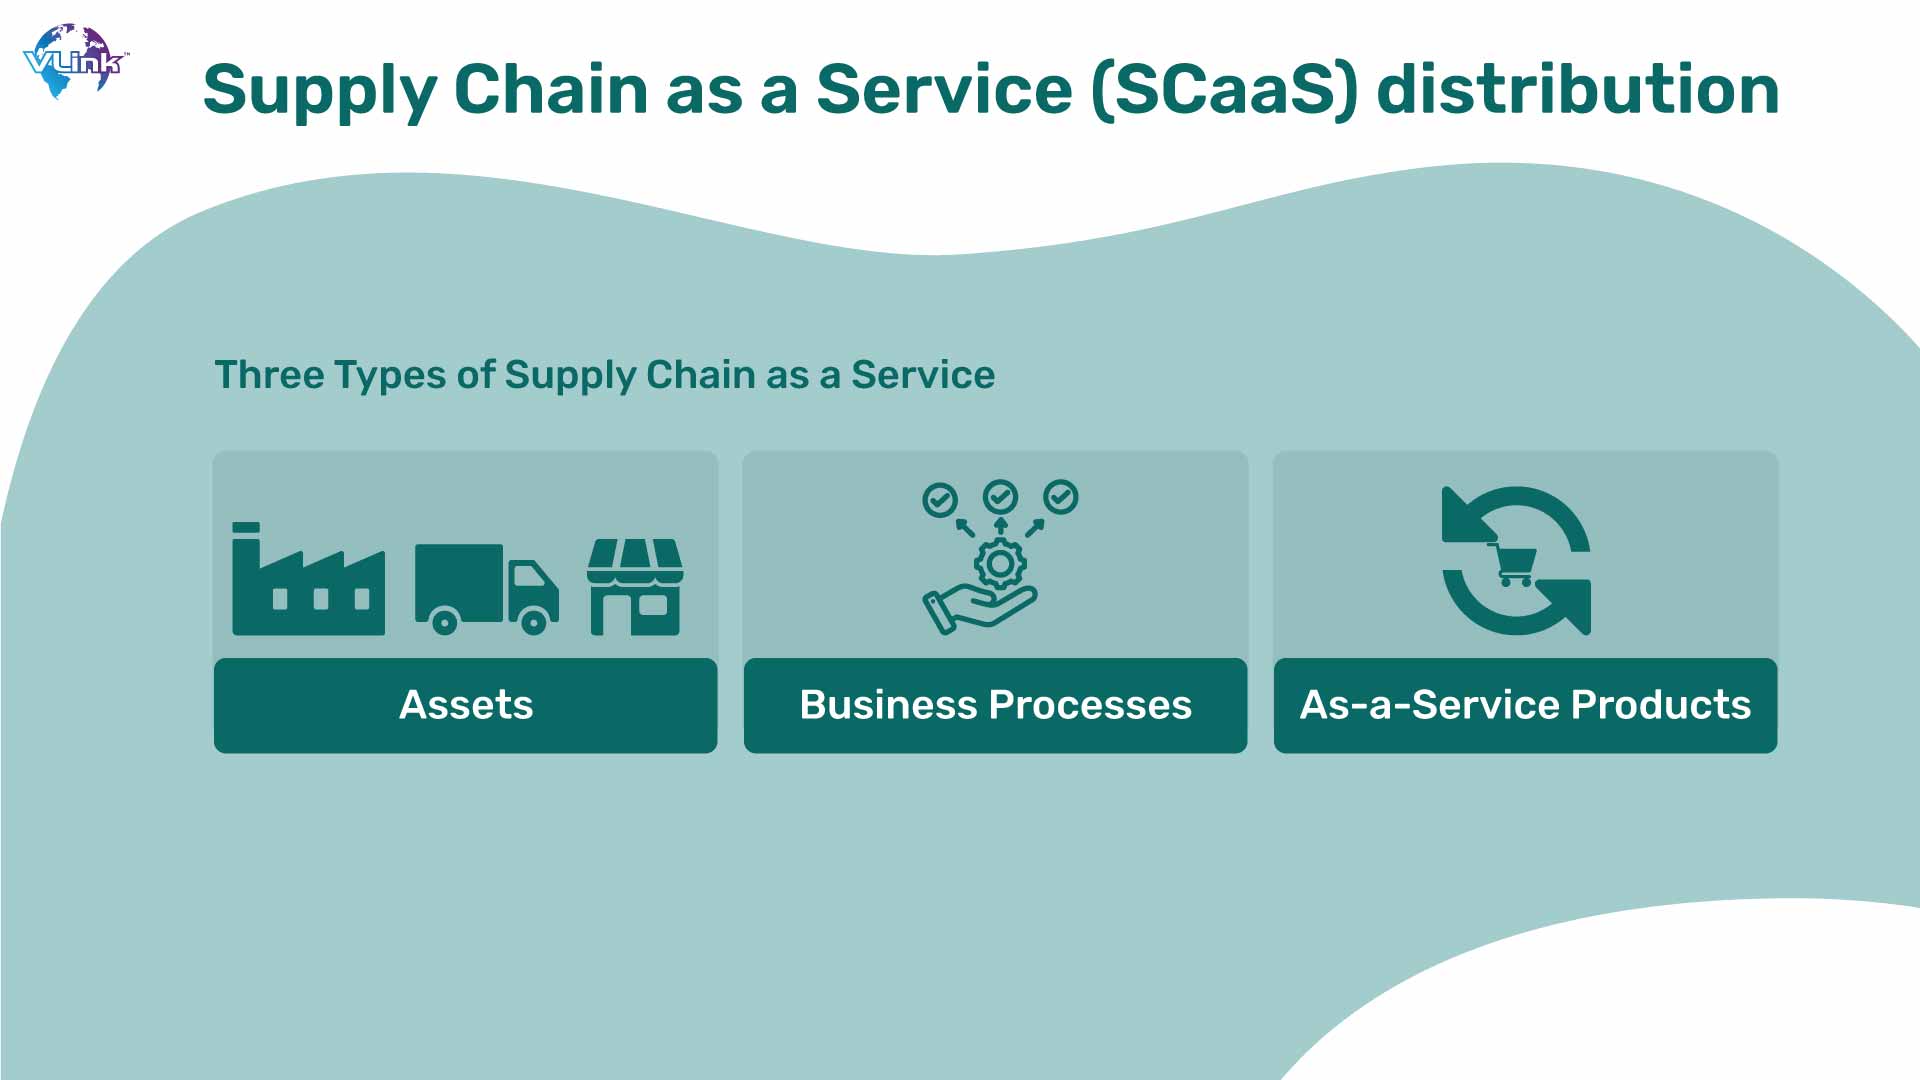 Supply chain as a services distribution